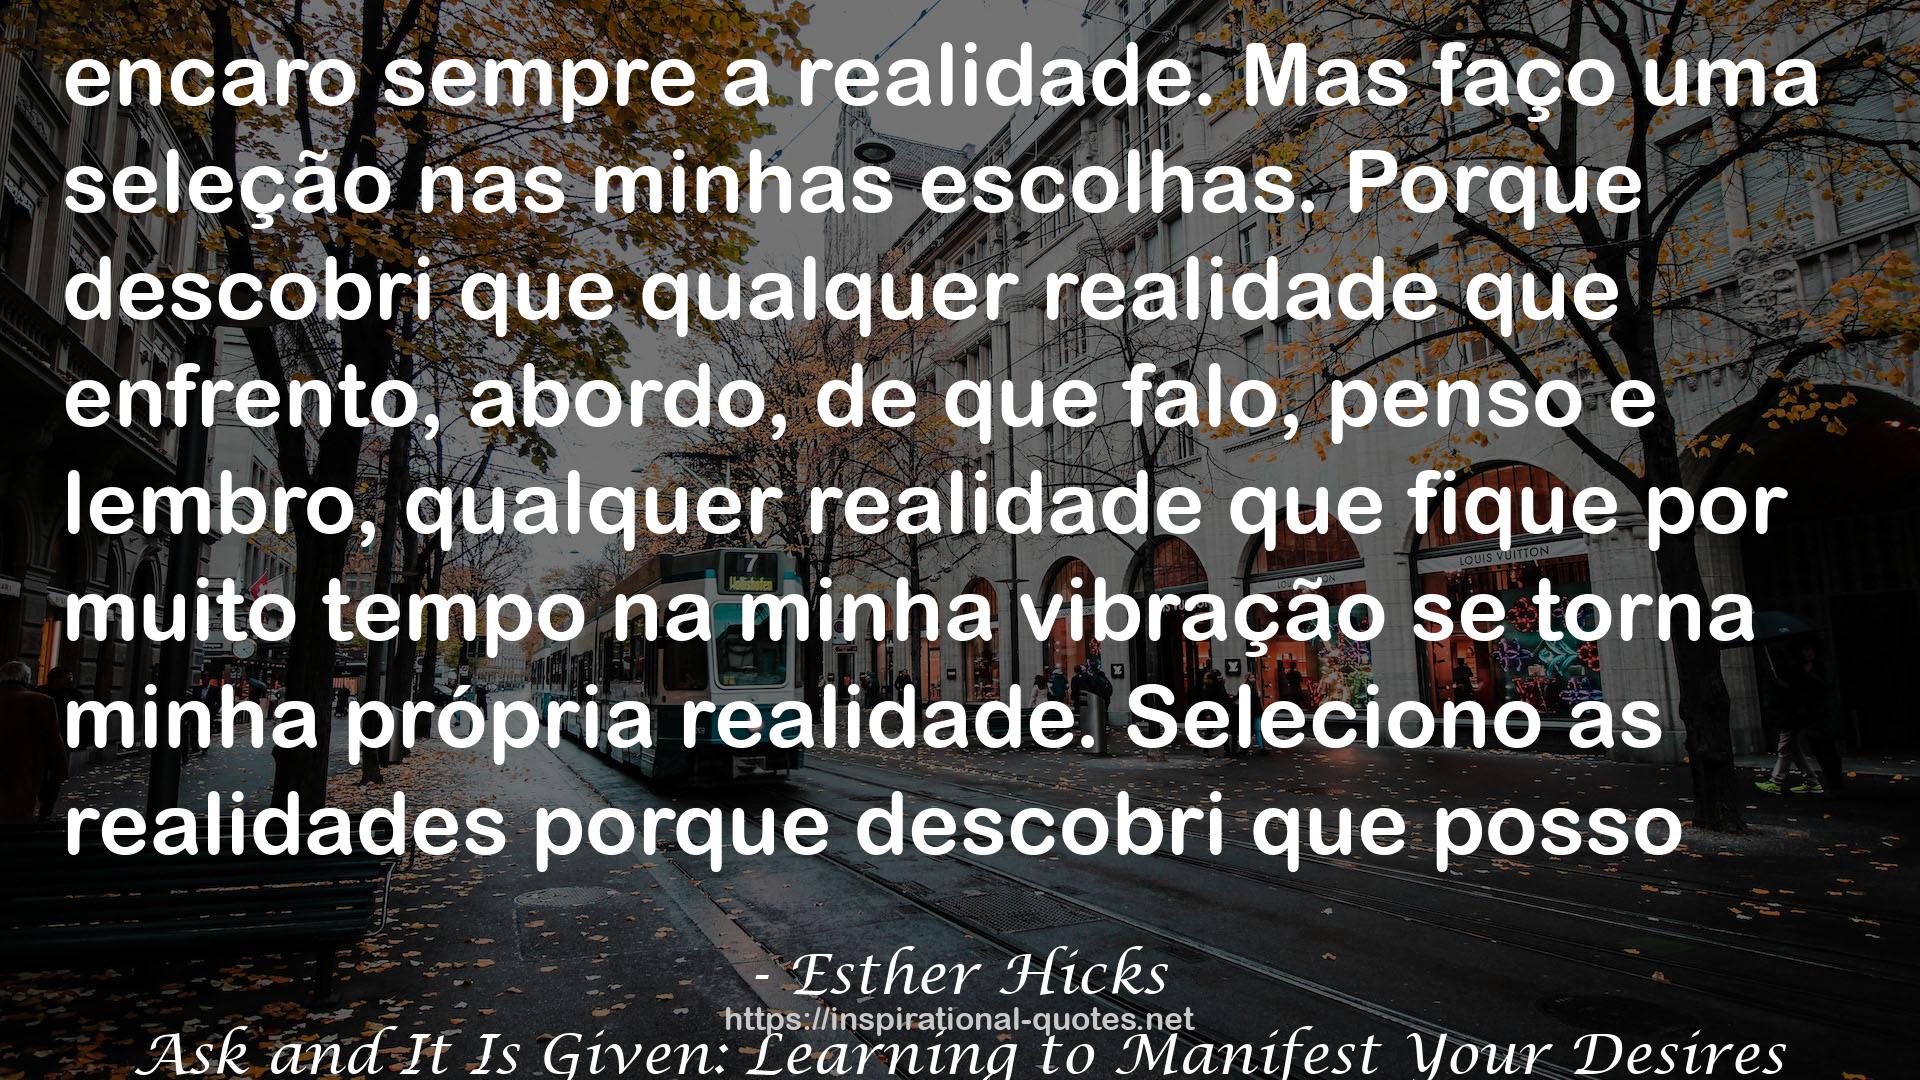 Esther Hicks QUOTES